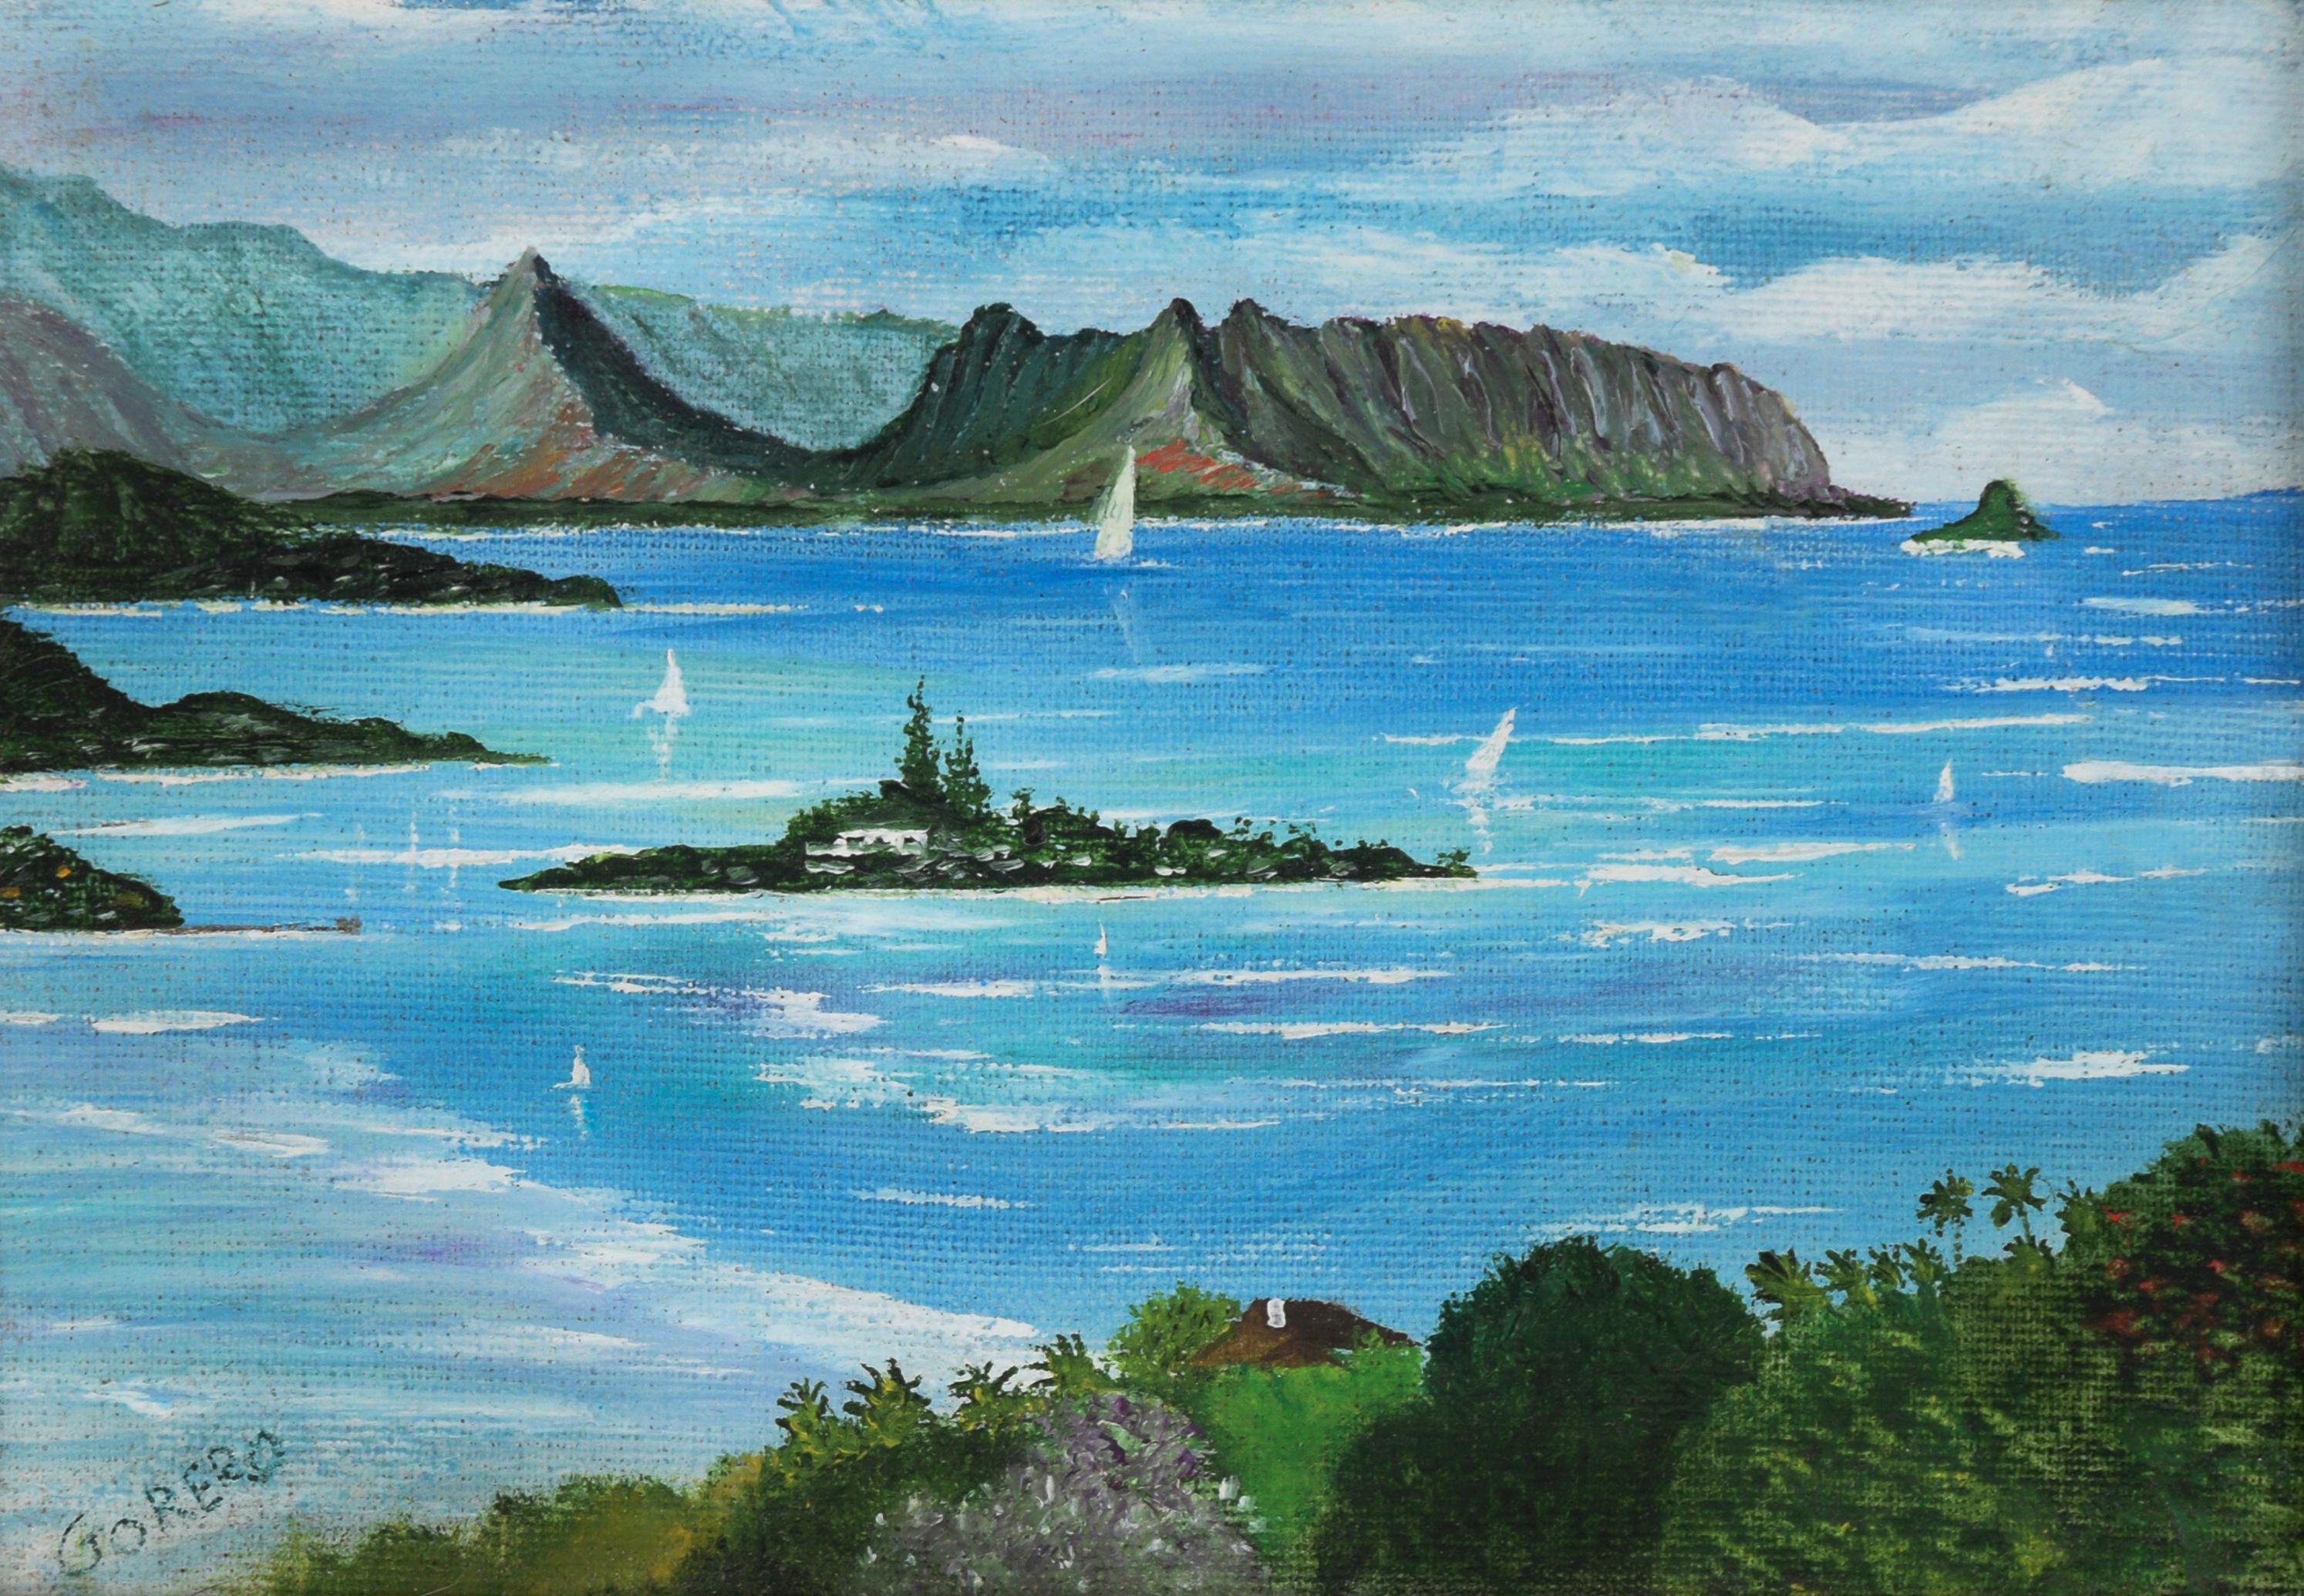 Kaneohe Bay, Hawaii 1989 - Oil on Canvas - Painting by Gorero